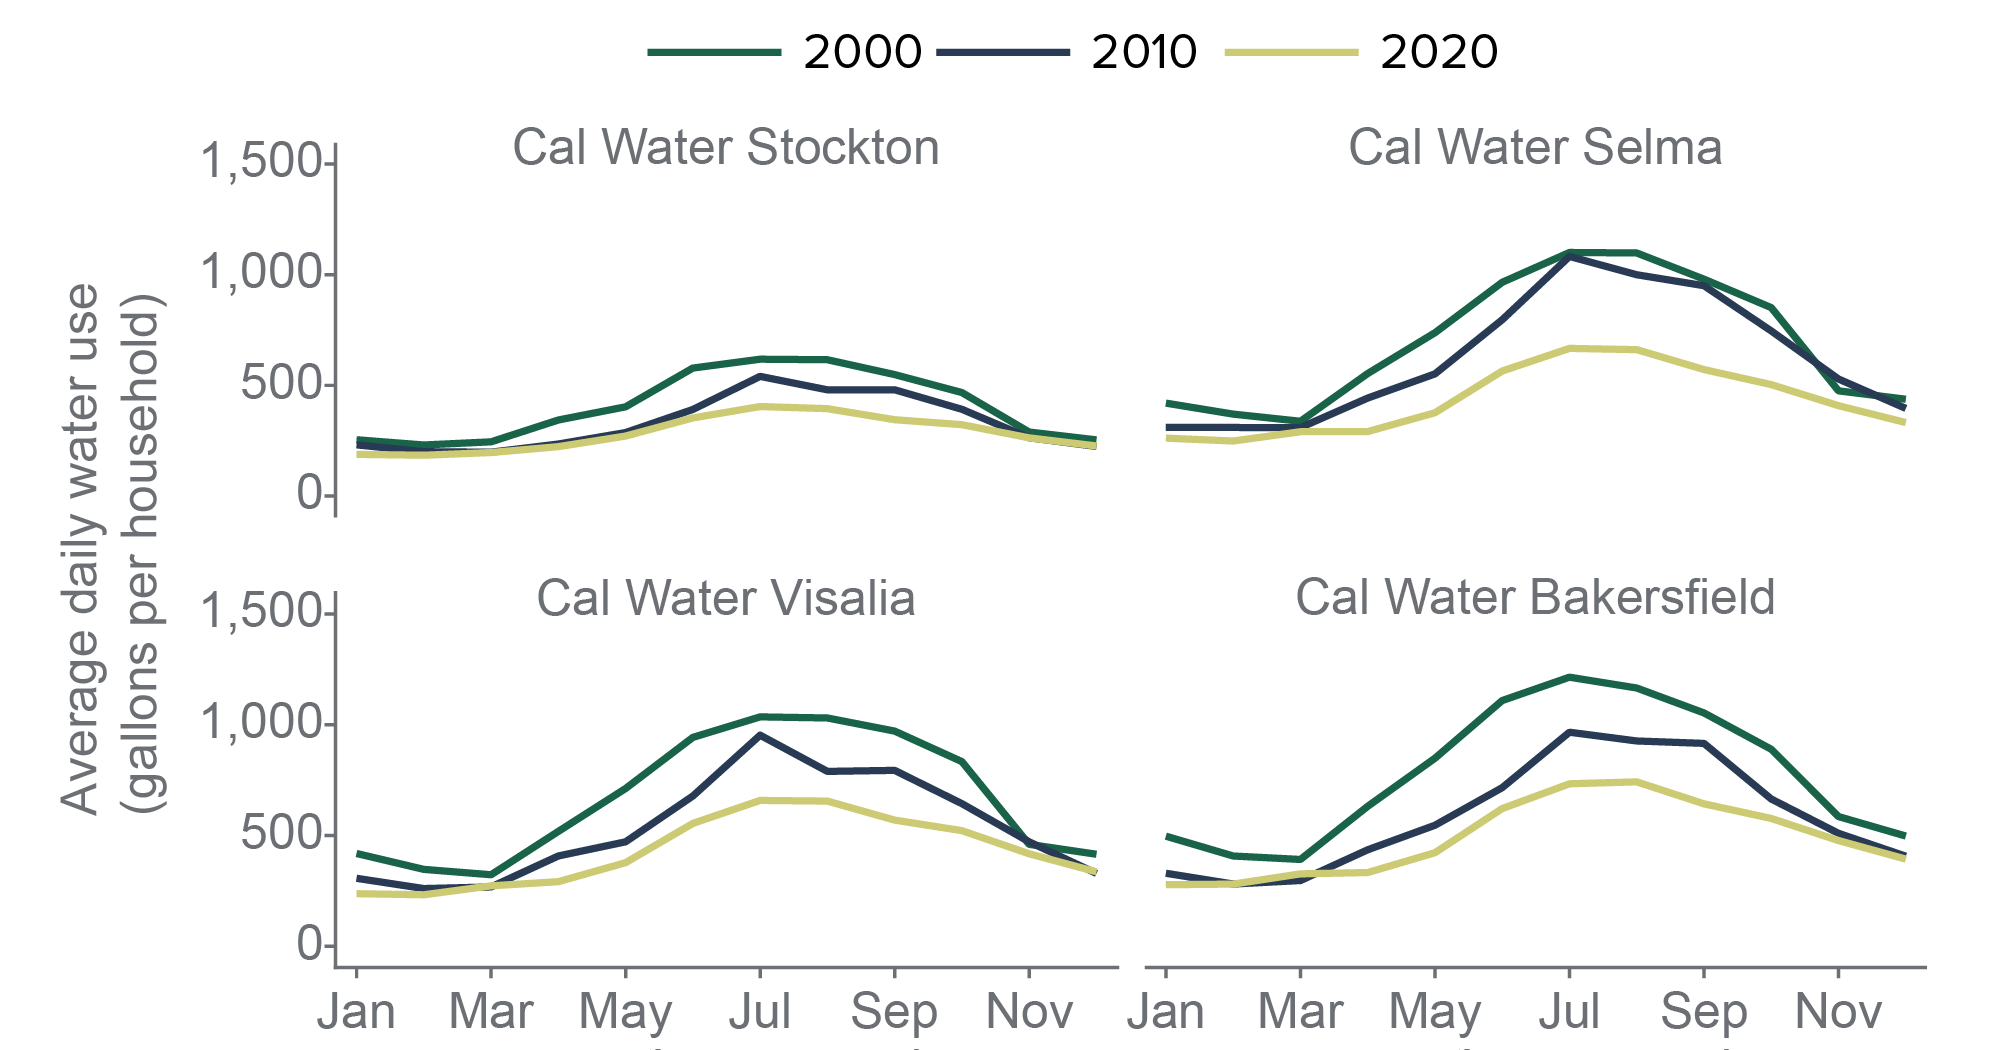 figure - Household water use has declined across the valleys Cal Water service areas, especially in summer months